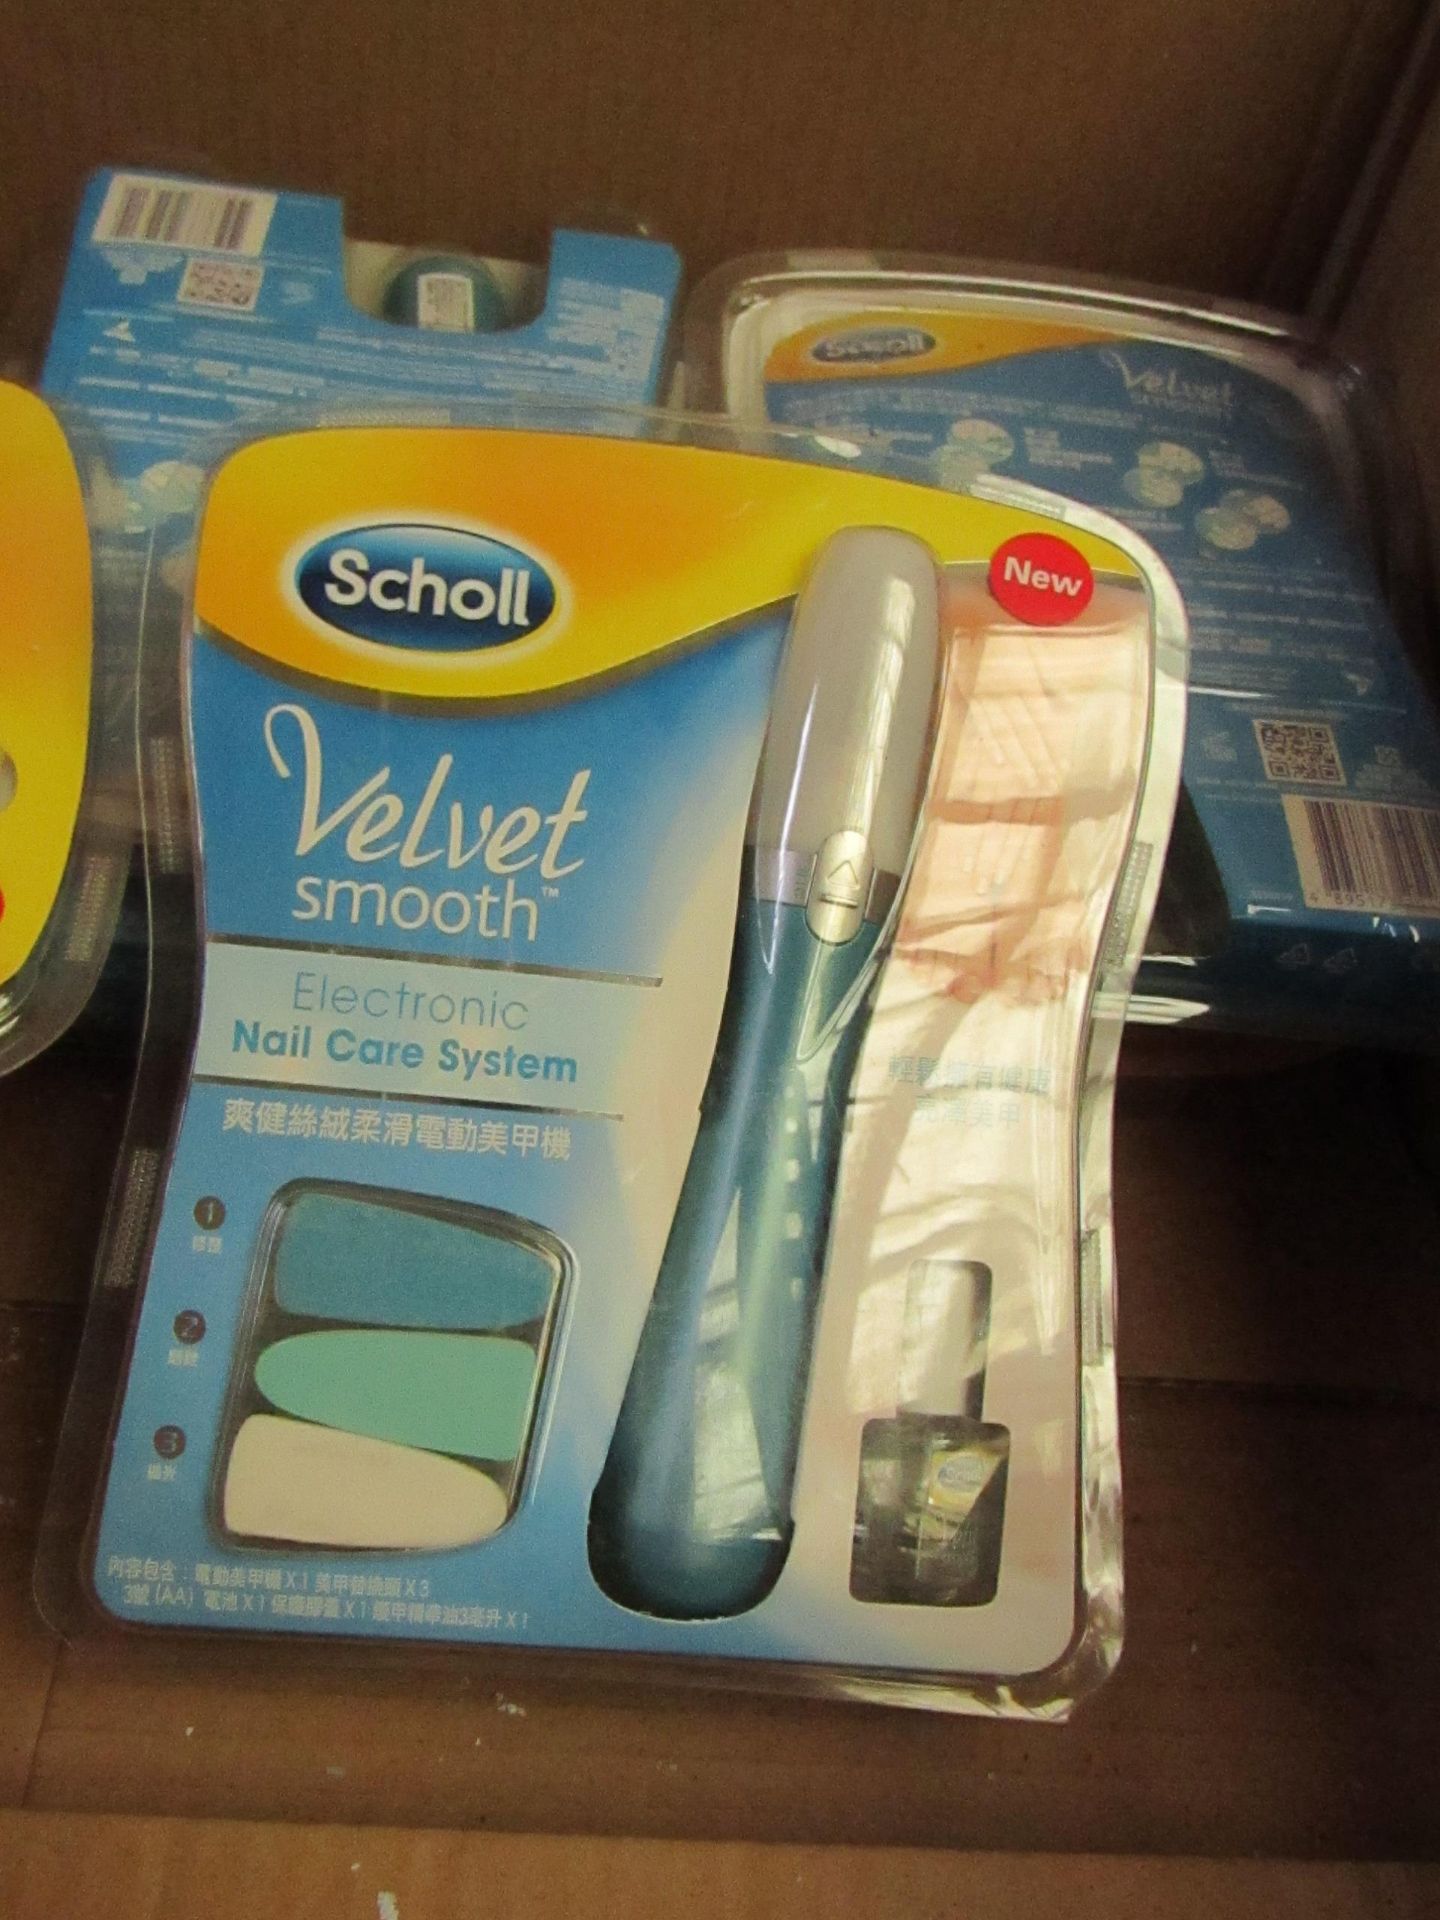 2 x Scholl velvet Smooth Nail care Systems. New & Packaged